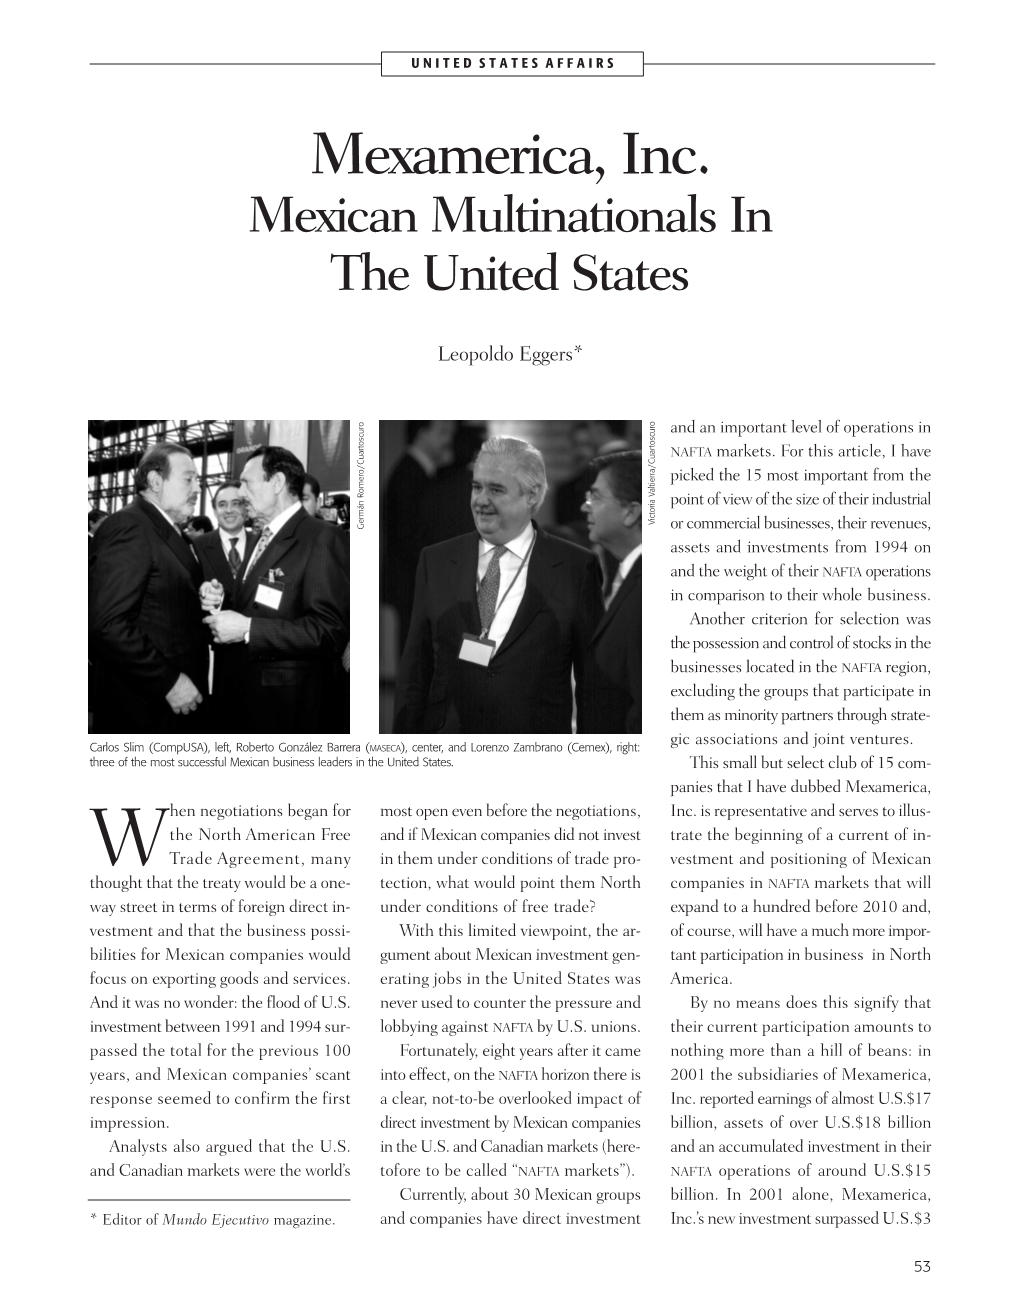 Mexamerica, Inc. Mexican Multinationals in the United States